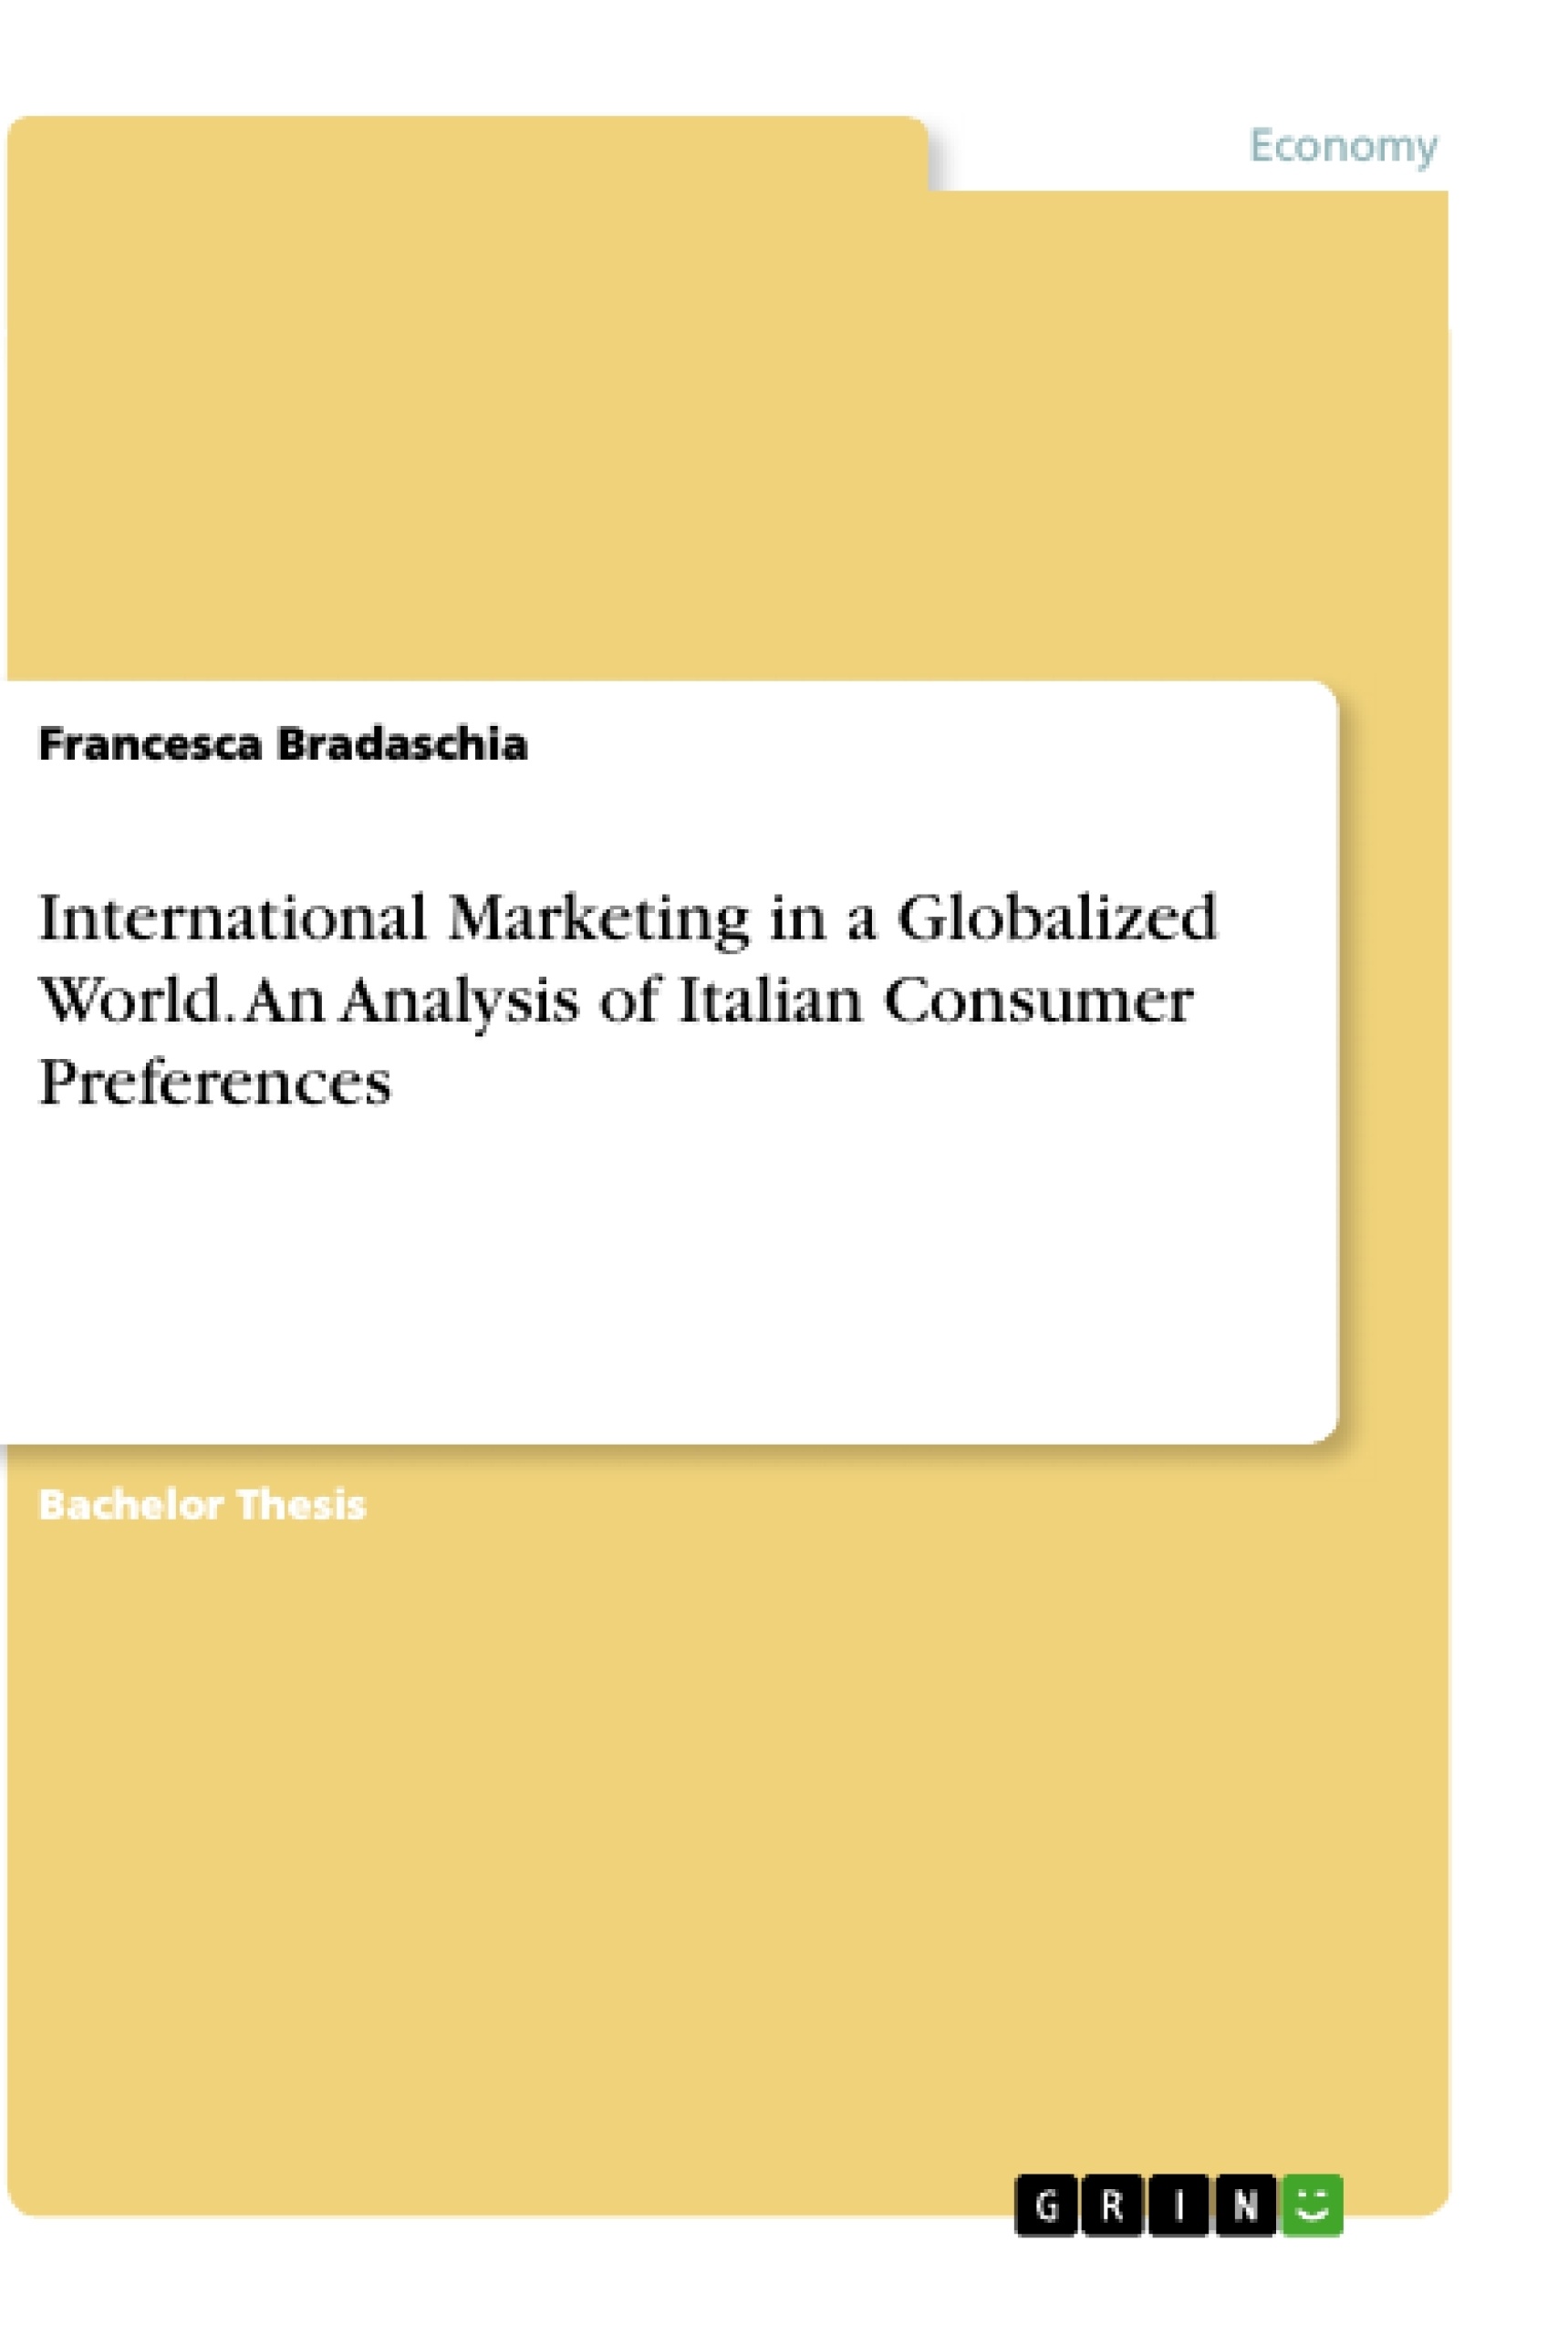 Title: International Marketing in a Globalized World. An Analysis of Italian Consumer Preferences